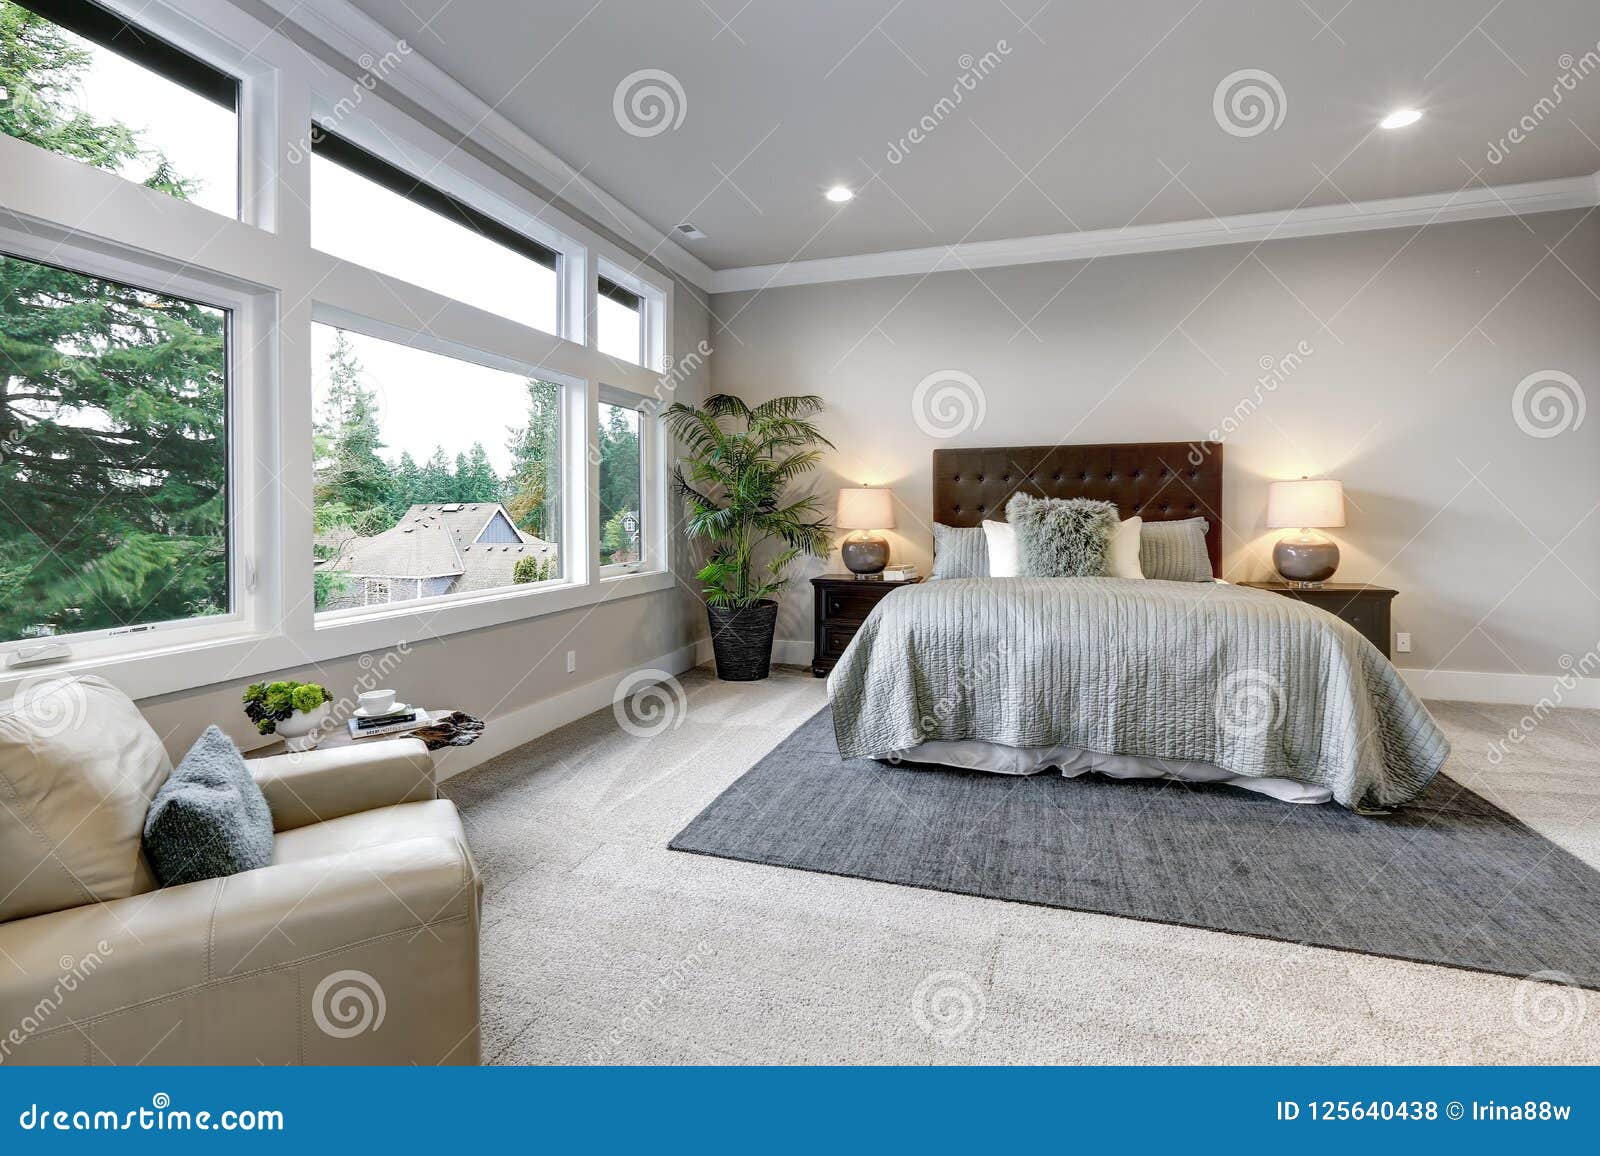 Open Modern Bedroom Interior With Large Windows And Grey